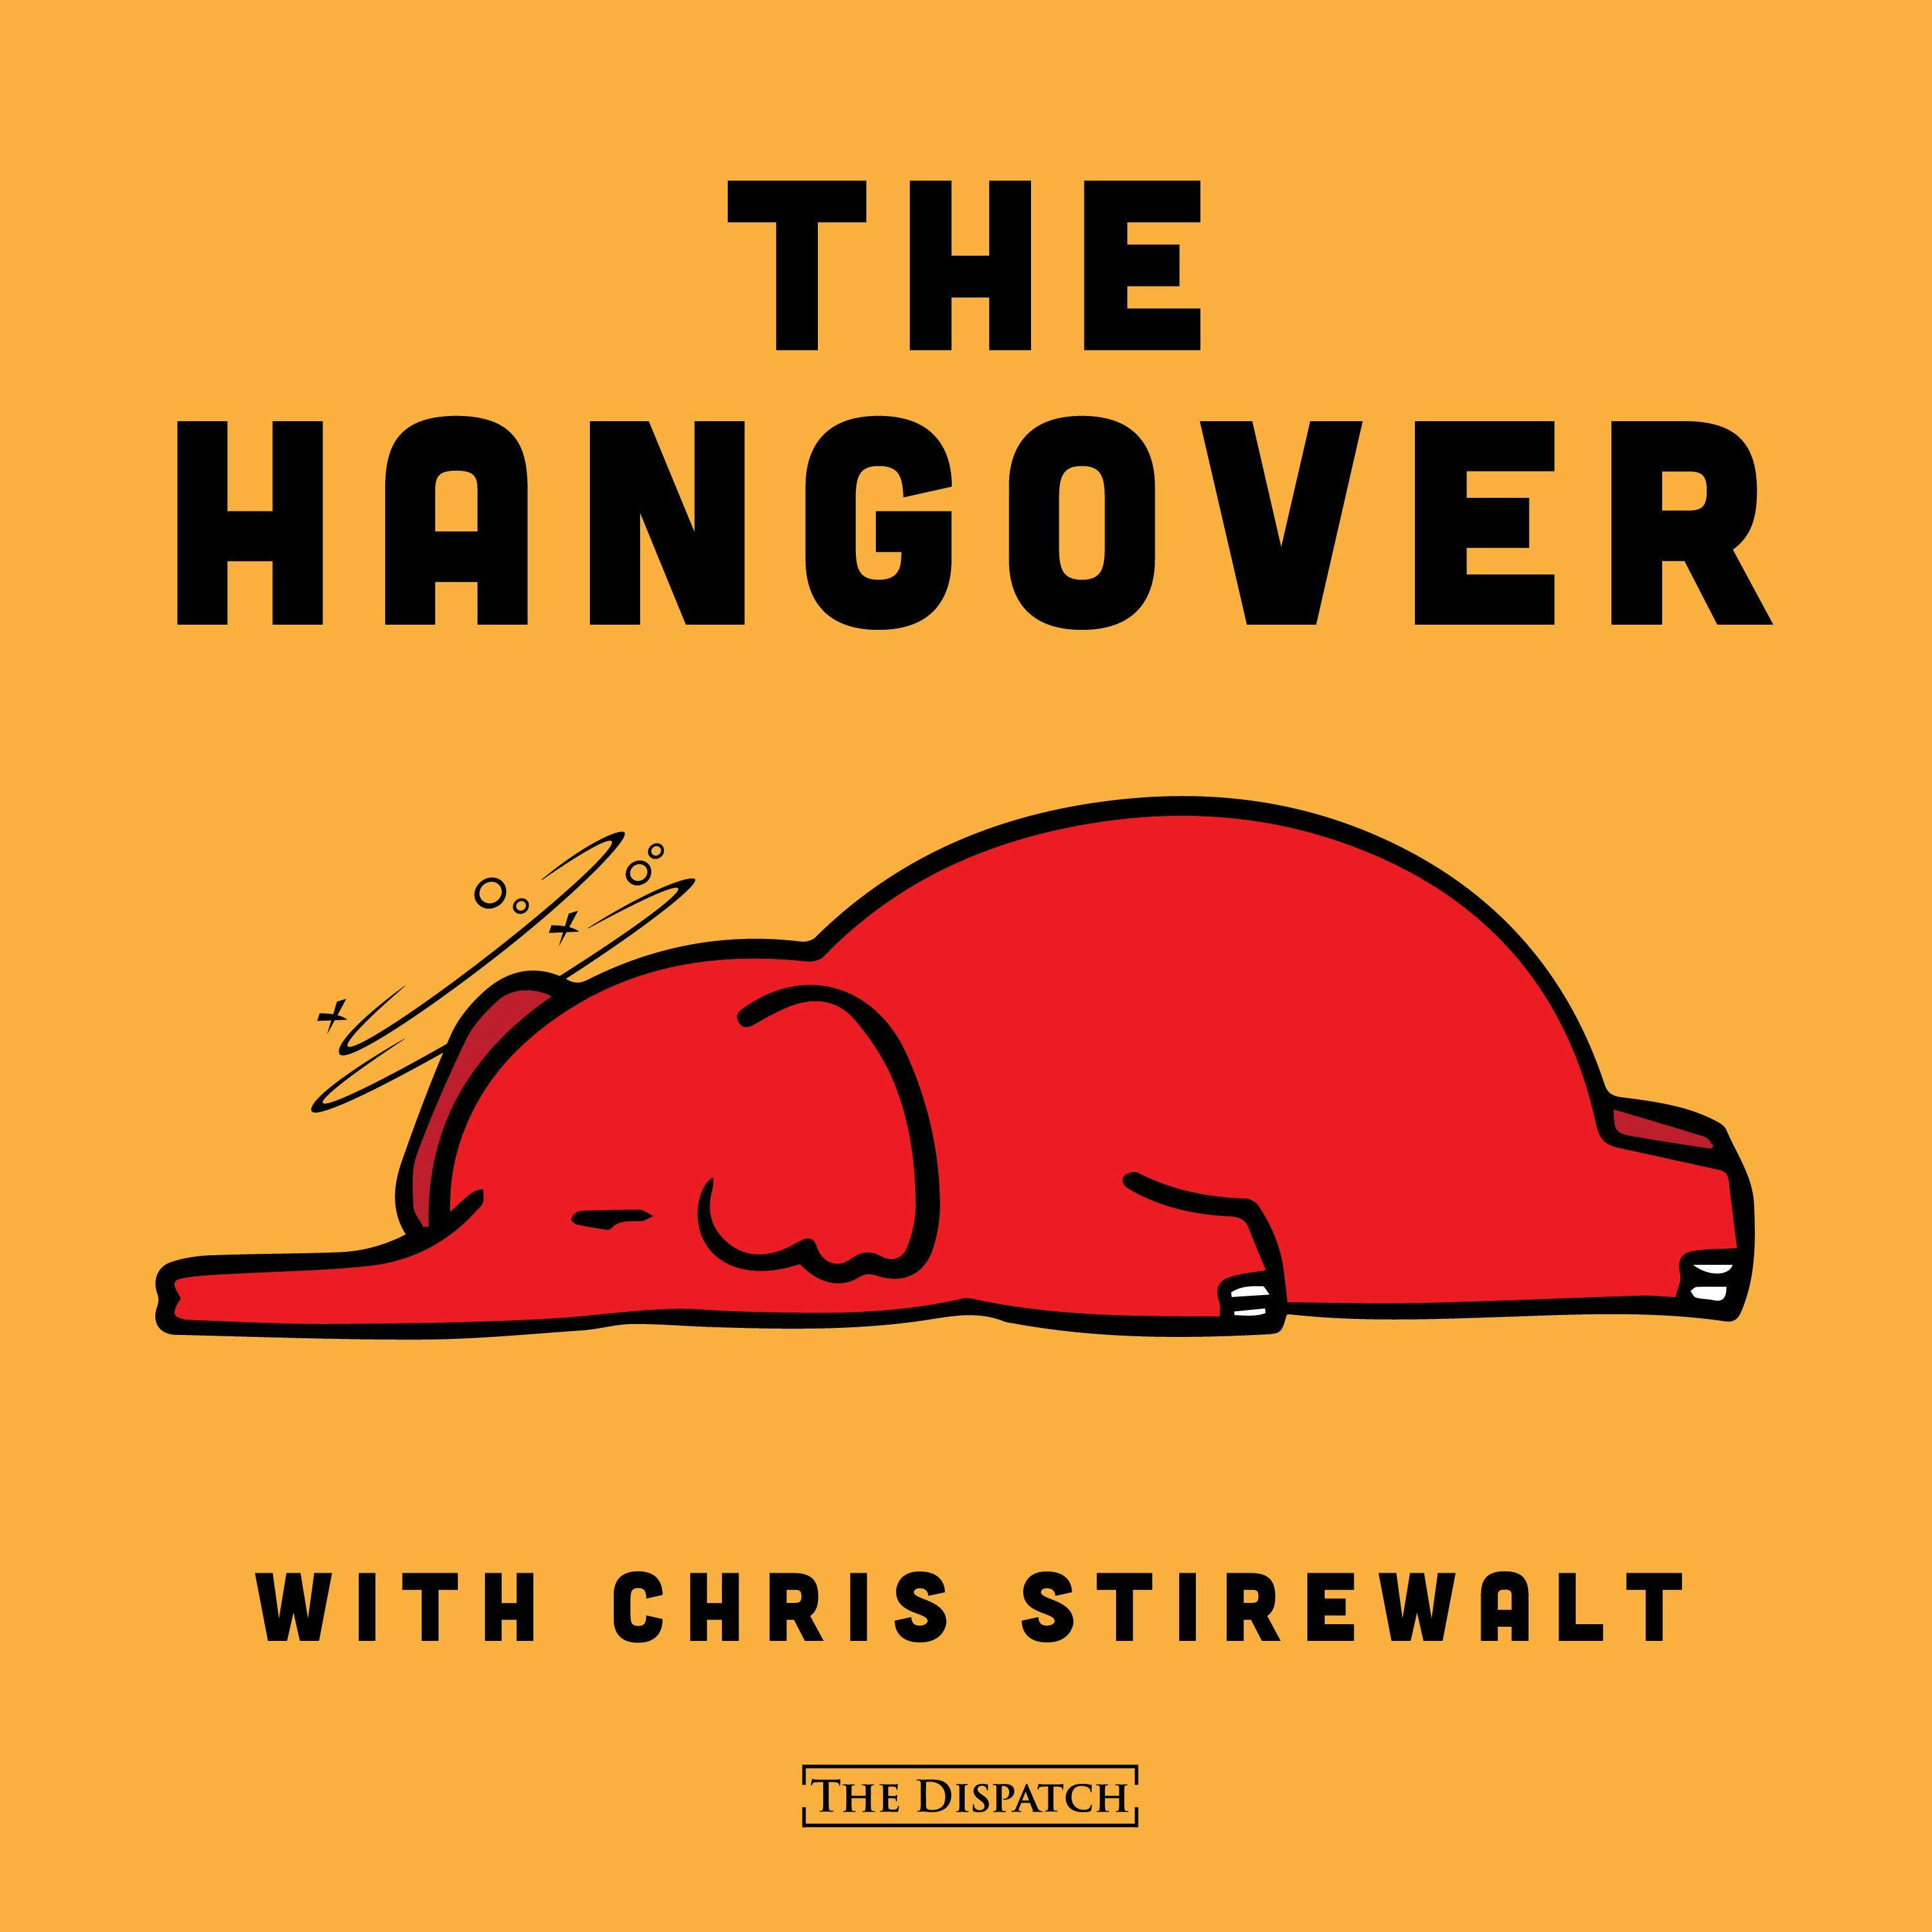 The Hangover Chapter 2: Chris Stirewalt and Eric Cantor